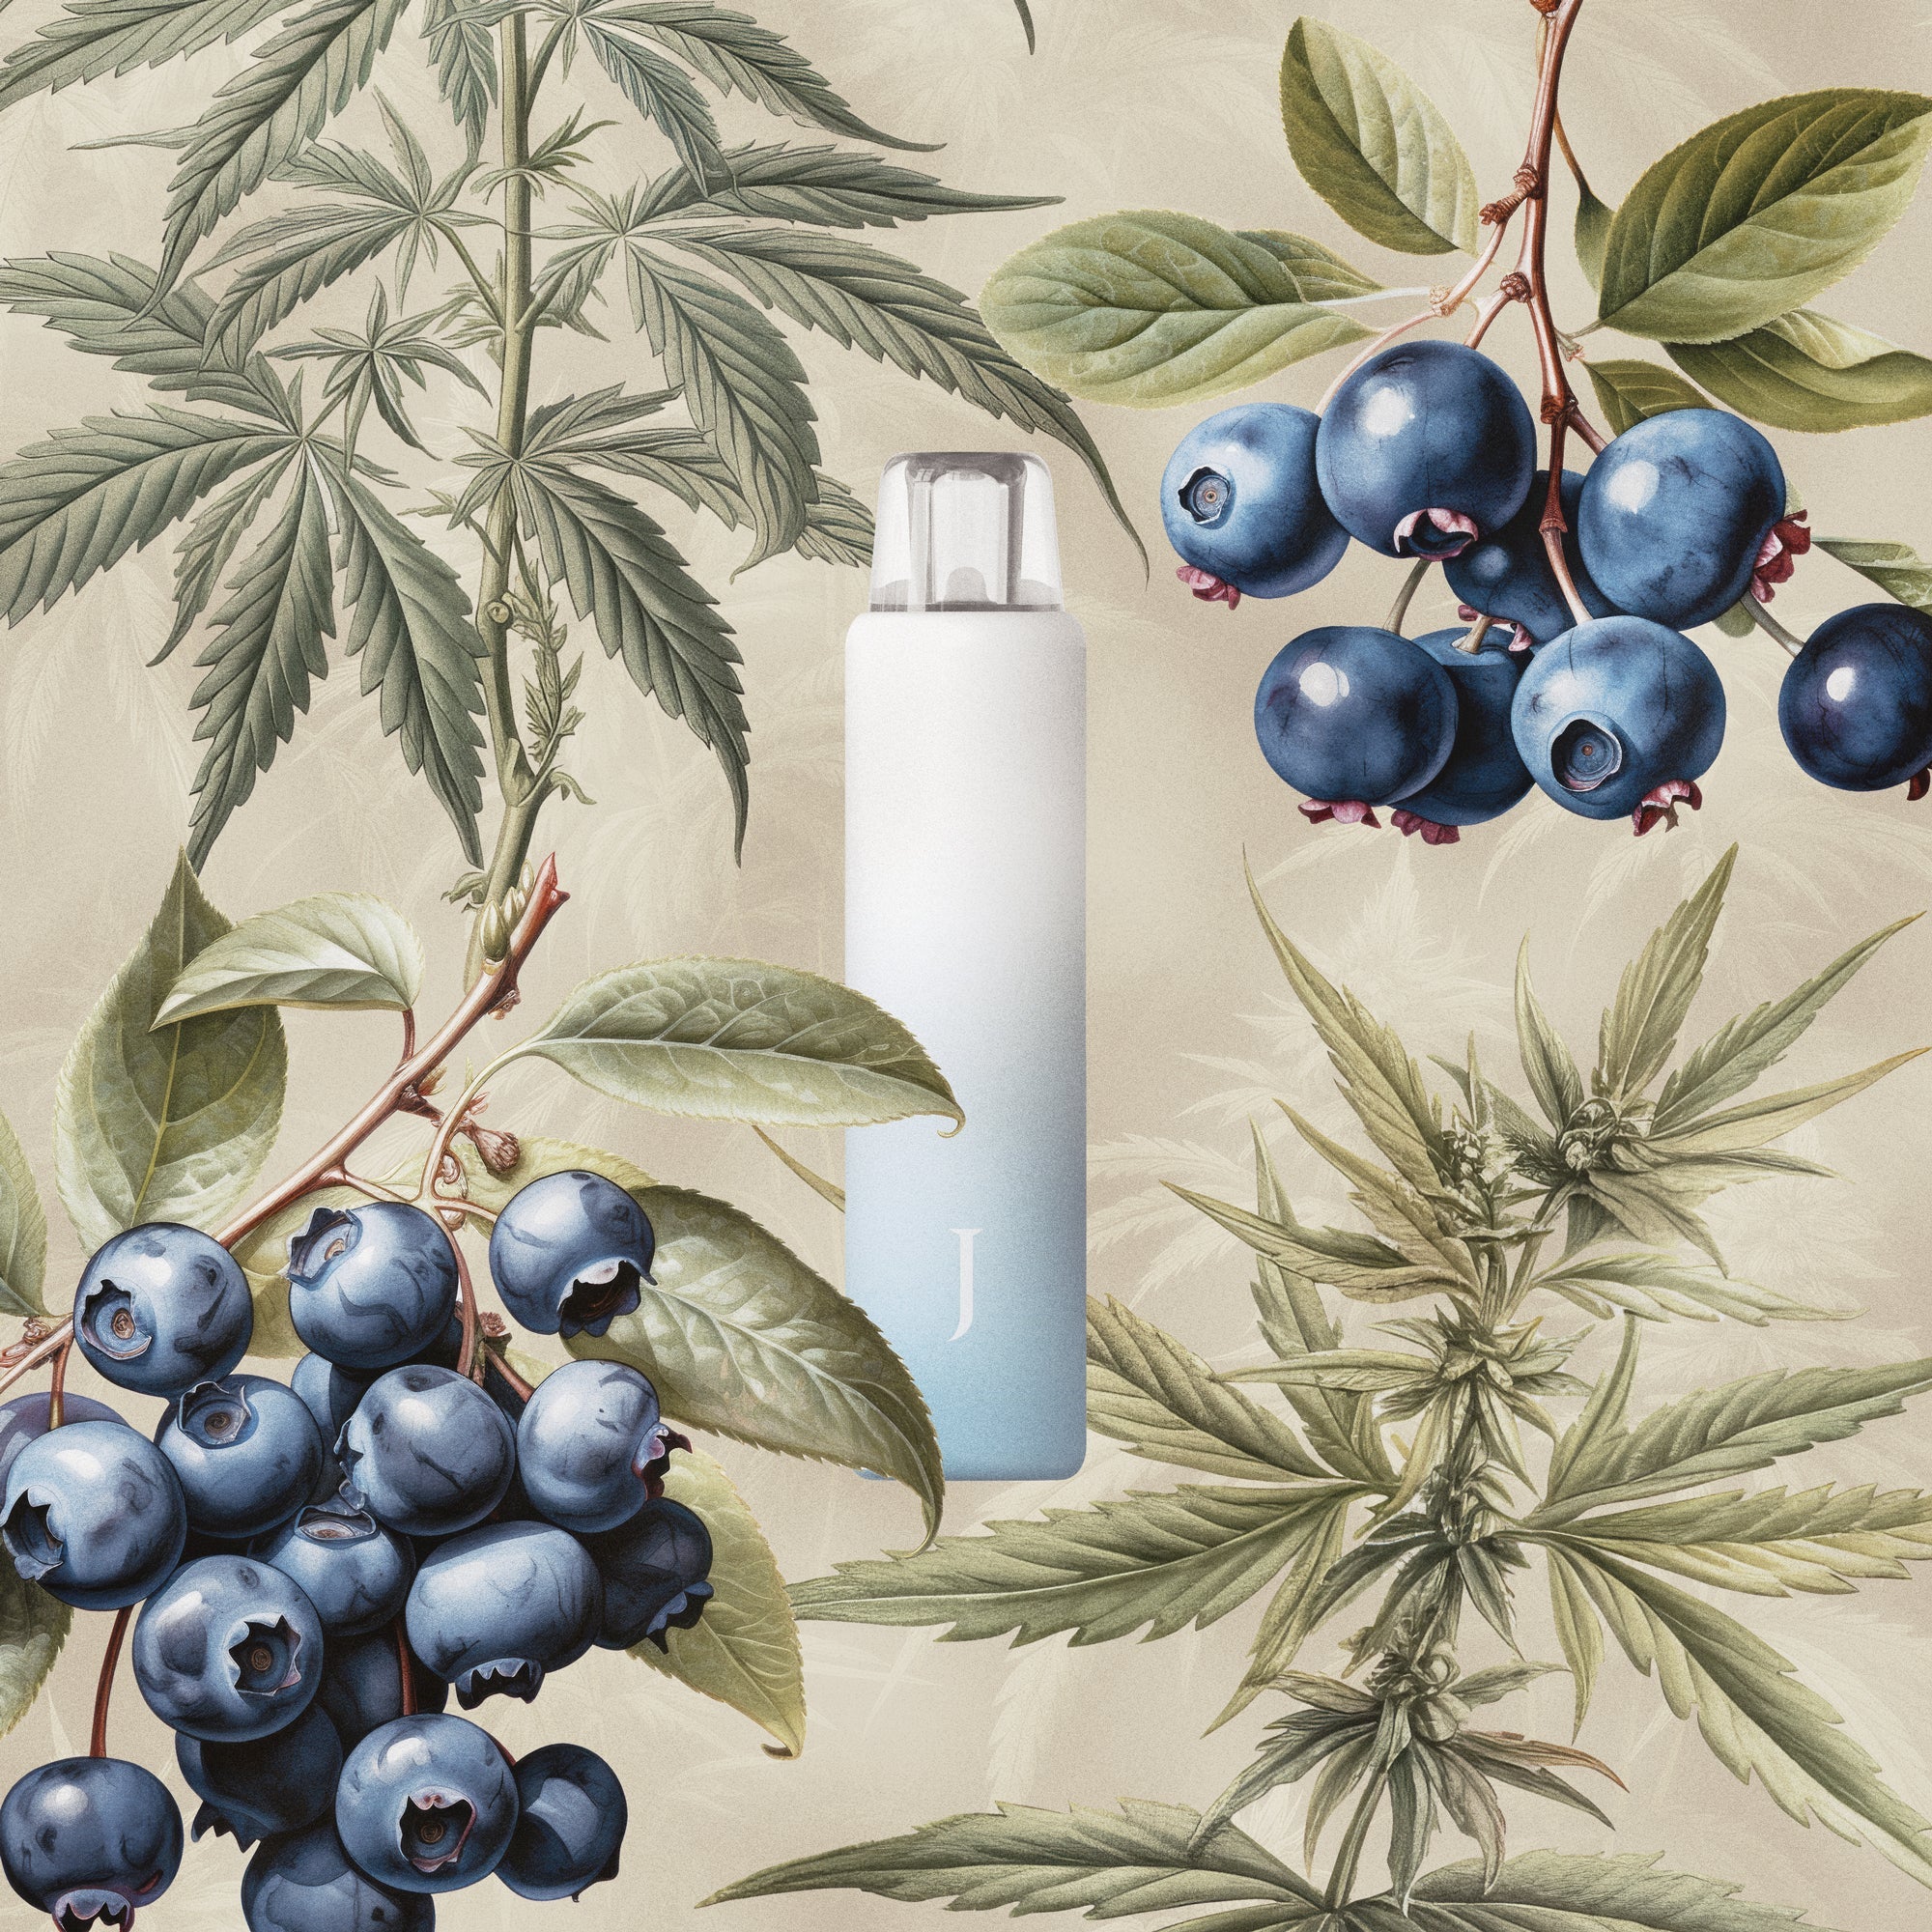 Juana All-in-One Cannabis Vape Pen with Marijuana Leaves and Blueberry Botanical Illustrations